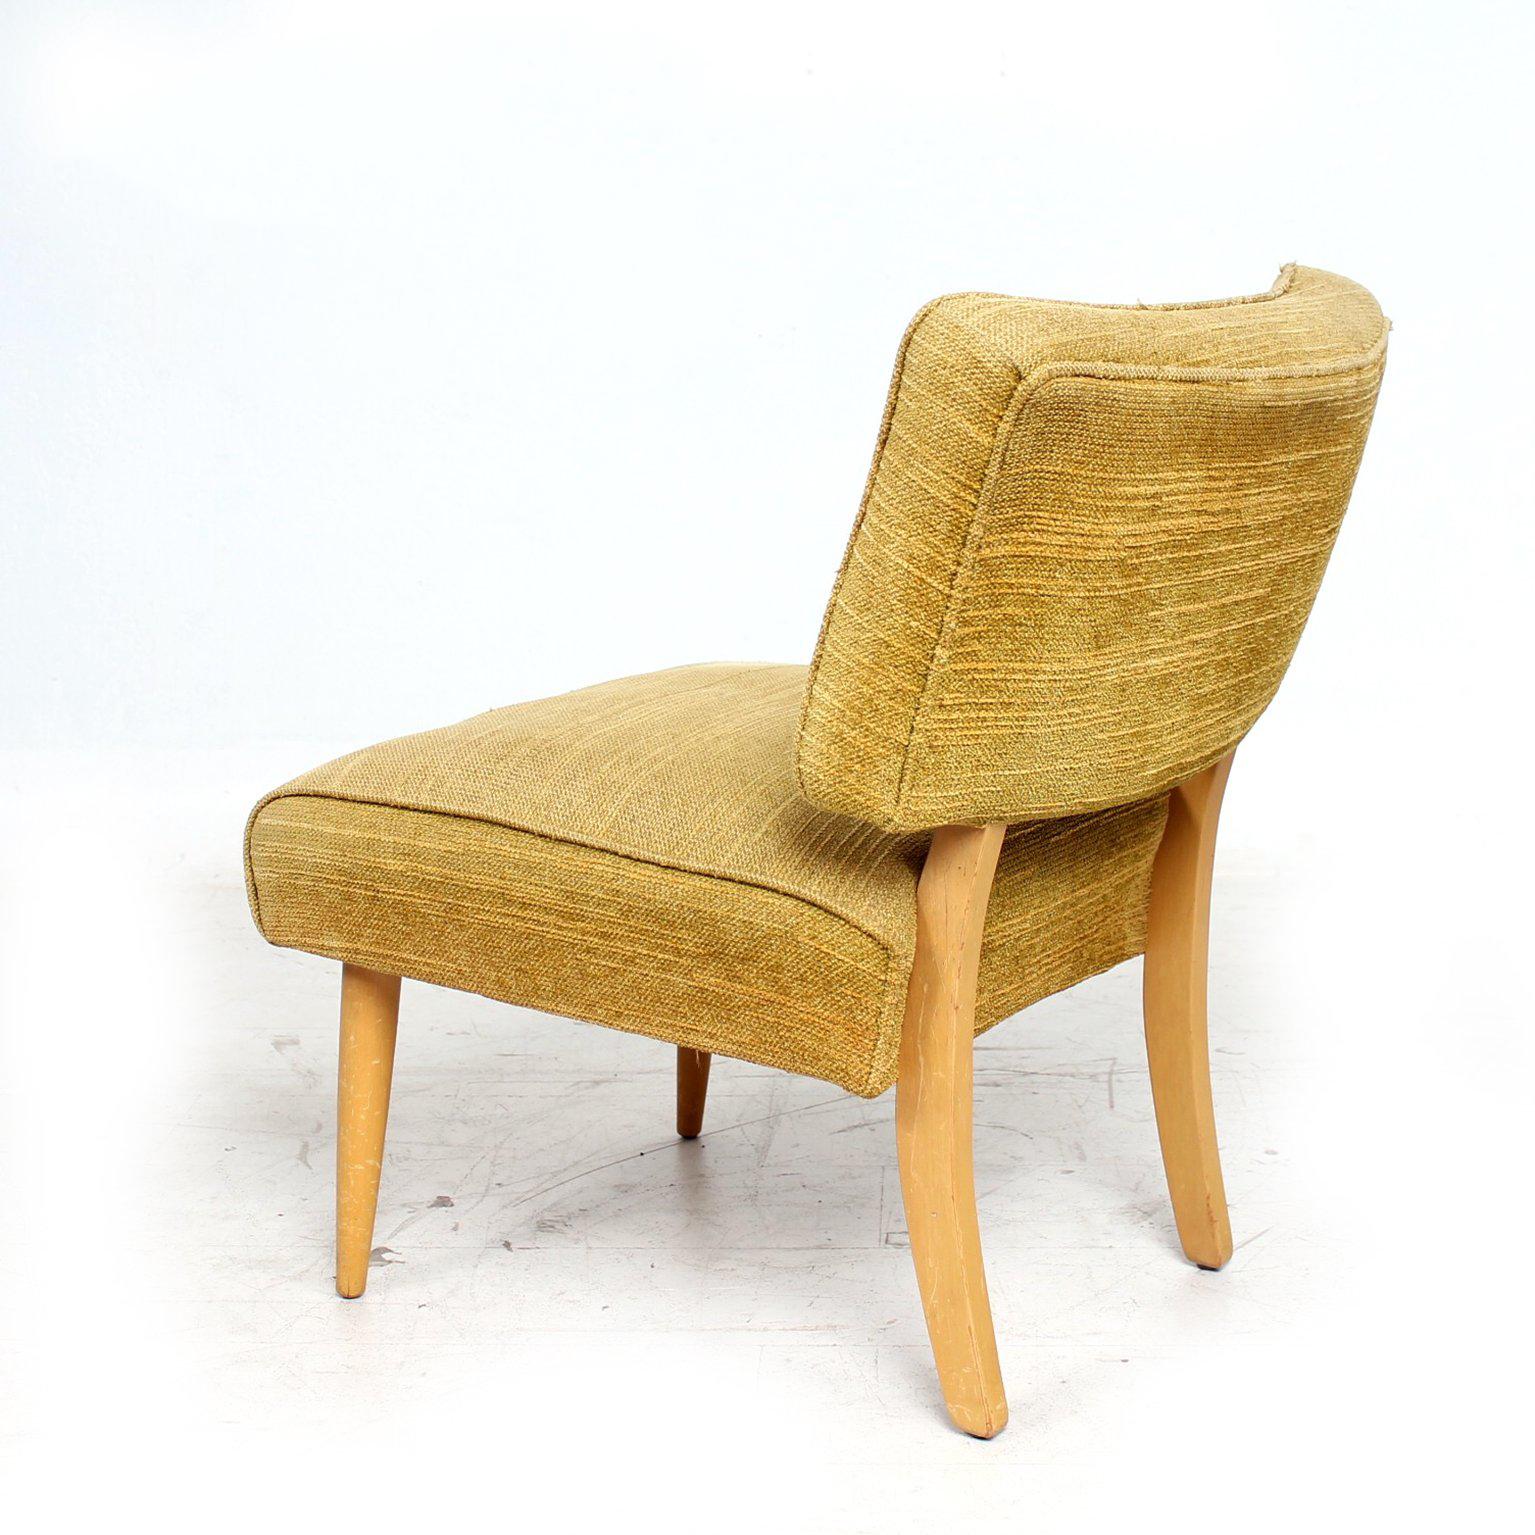 AMBIANIC presents: adorable Mid-Century Modern side slipper chair with tons of charm. 
No markings from the maker present.
Clean modern lines. Curved back and oversized seat. Comfort too, with no armrest!
Attributed to Billy Haines and the fabulous